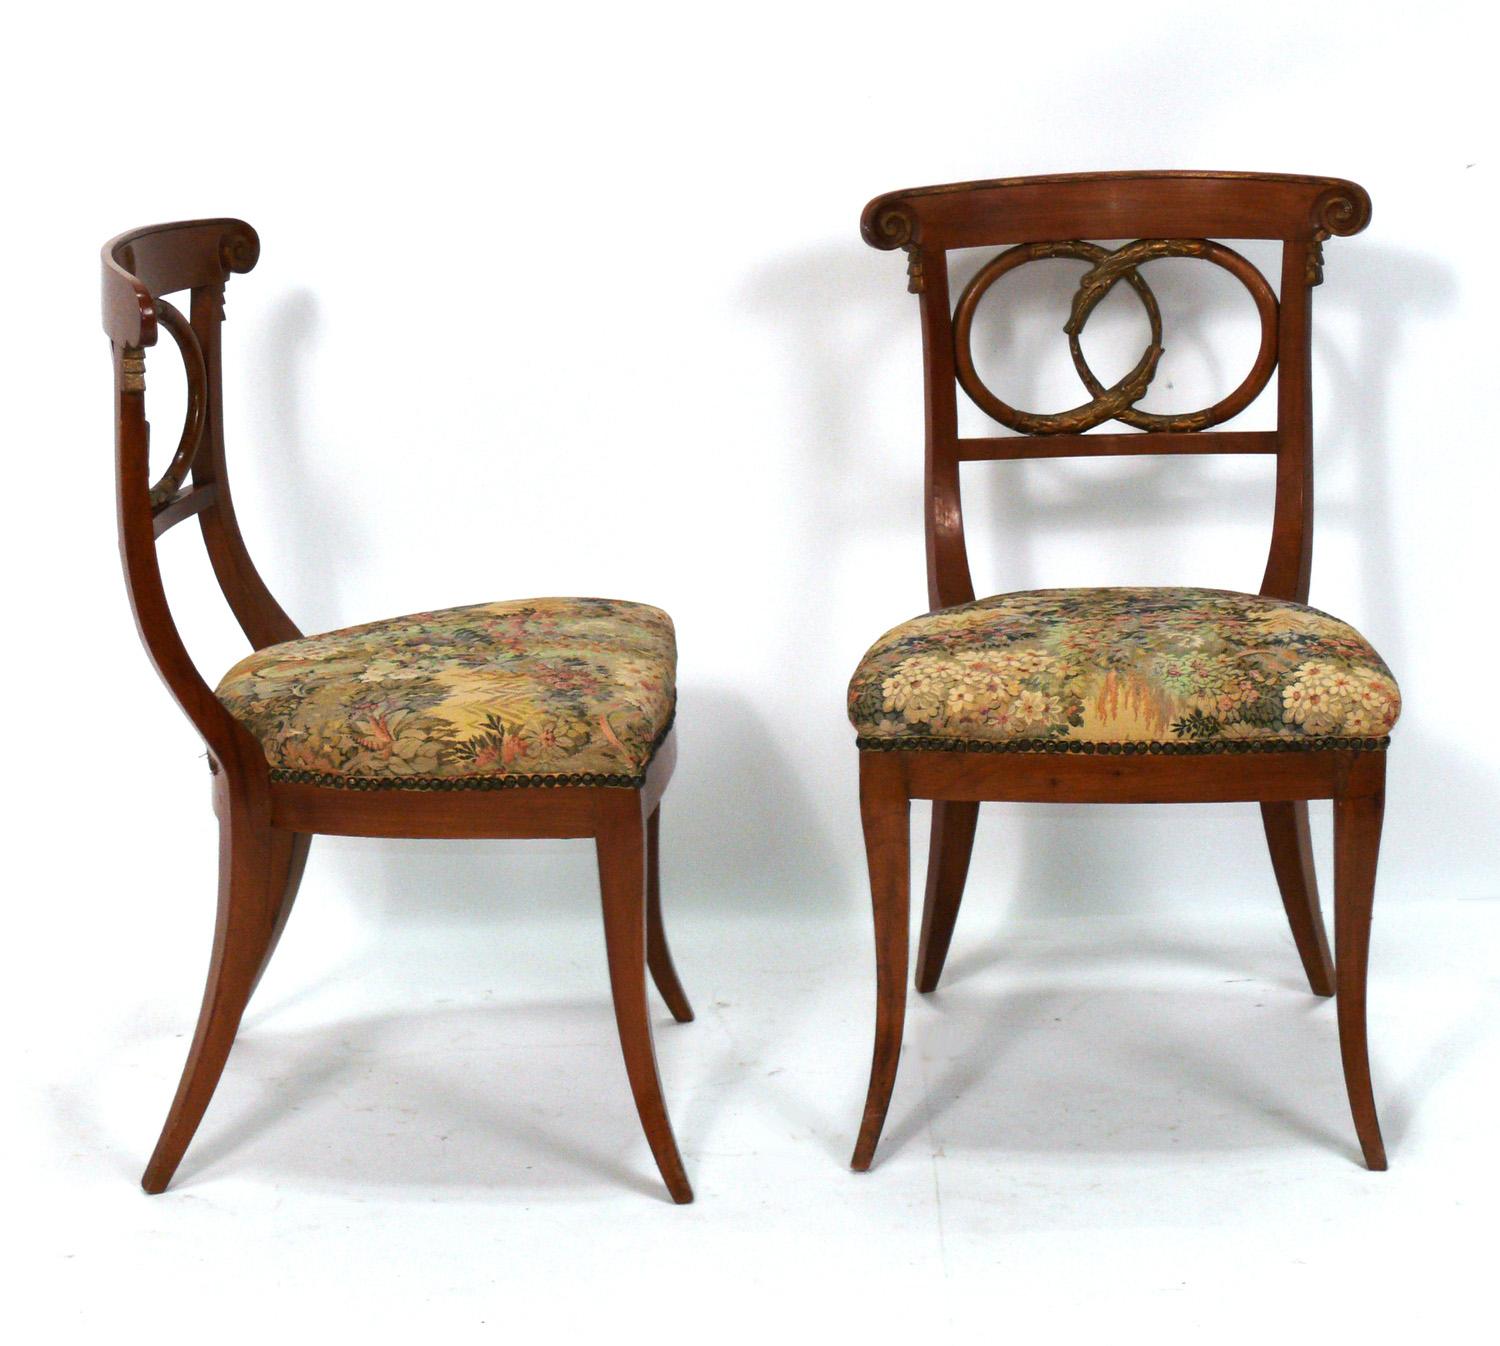 Pair of Curvaceous Italian Chairs with Gilt Ouroboros Decoration, believed to be late 19th or early 20th Century, Italian. These chairs are currently being reupholstered and can be completed in your fabric. Simply send us 1.5 yards of your fabric